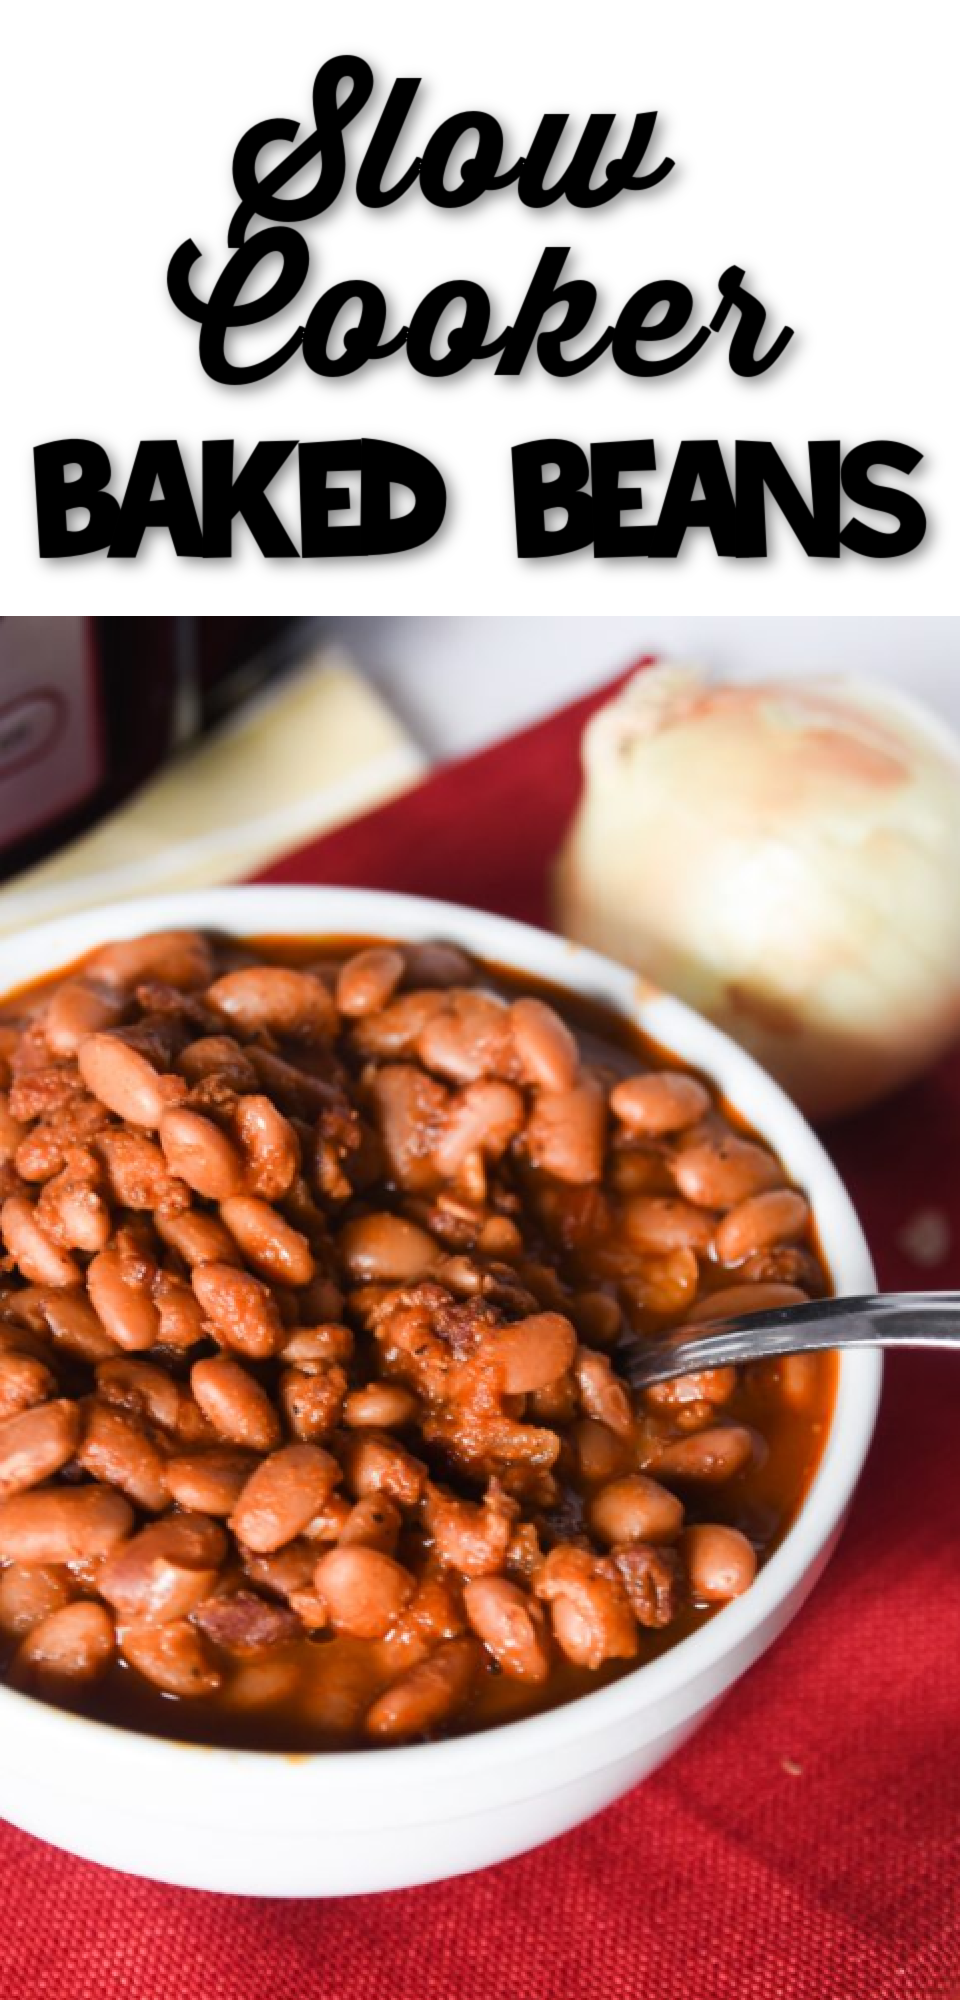 Homemade Baked Beans are so easy to make. Our slow cooker baked bean recipe is a delicious combination of tender beans and a delicious sweet and savory sauce. You will love crock pot baked beans and never go back to canned baked beans again! via @simplysidedishes89